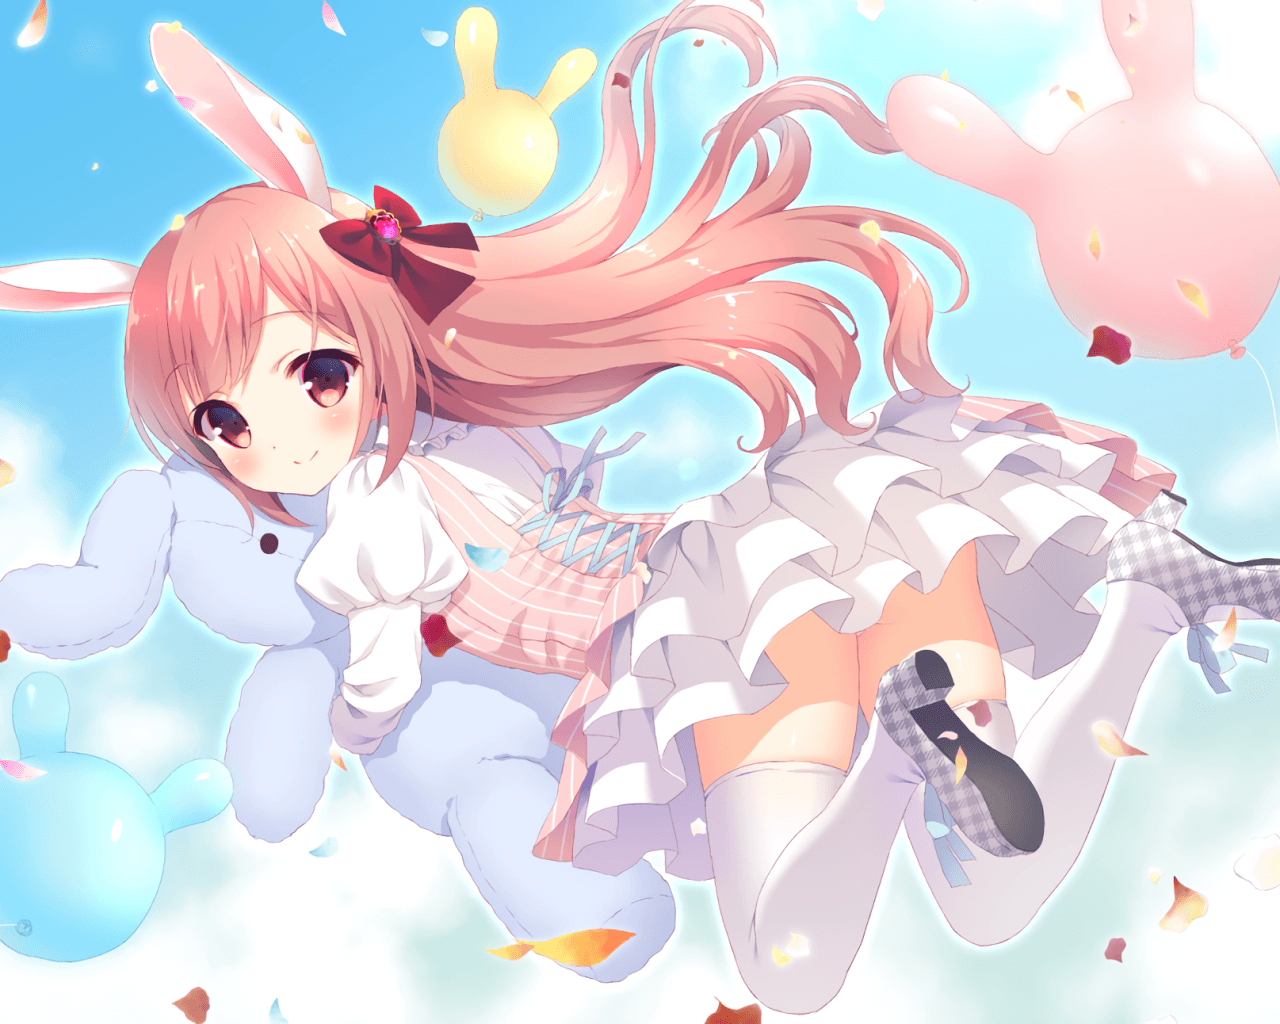 2,474 Anime Bunny Images, Stock Photos & Vectors | Shutterstock